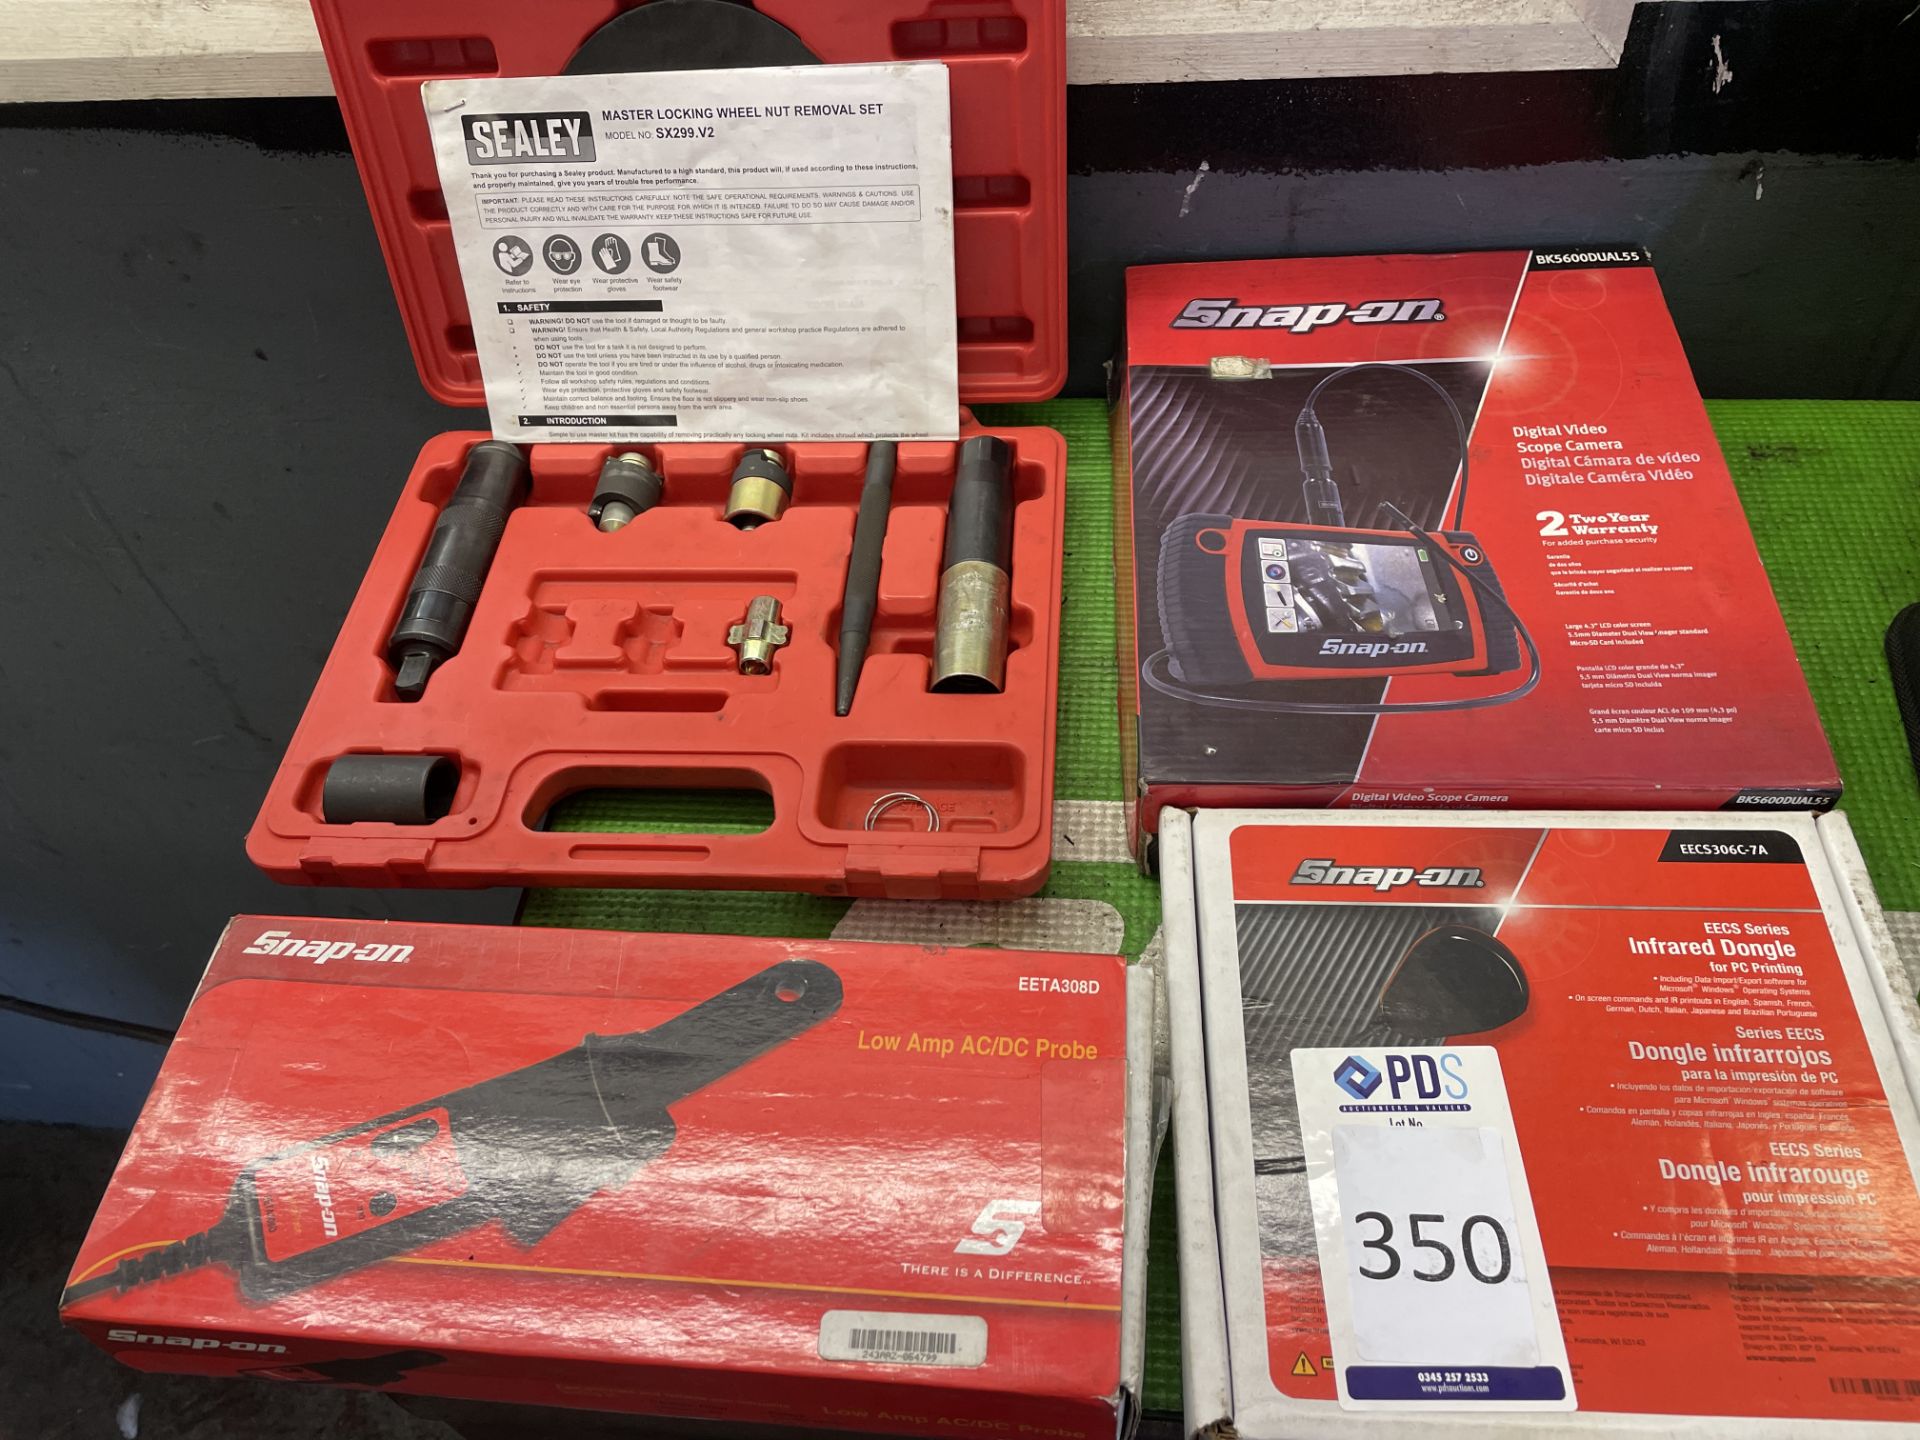 Snap-On Infrared Dongle, Digital Videoscope Camera, Low Amp AC/DC Probe and a Sealey Master